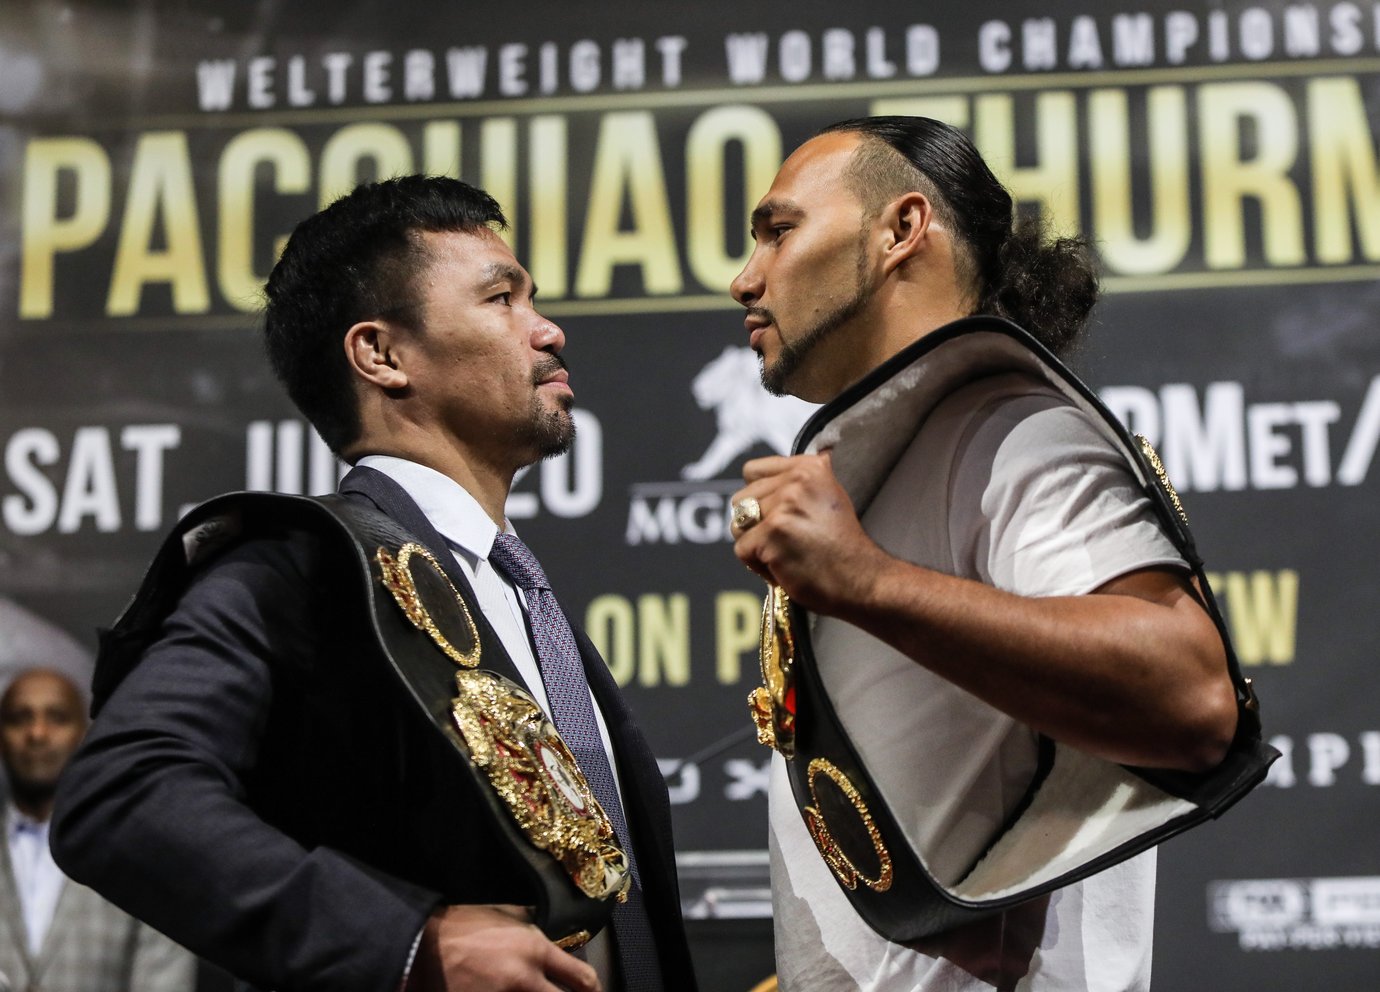 WORD WAR. Keith Thurman proclaims he will make 'easy work' of Manny Pacquiao. Photo by Darnell Ellerbe/Mayweather Promotions   